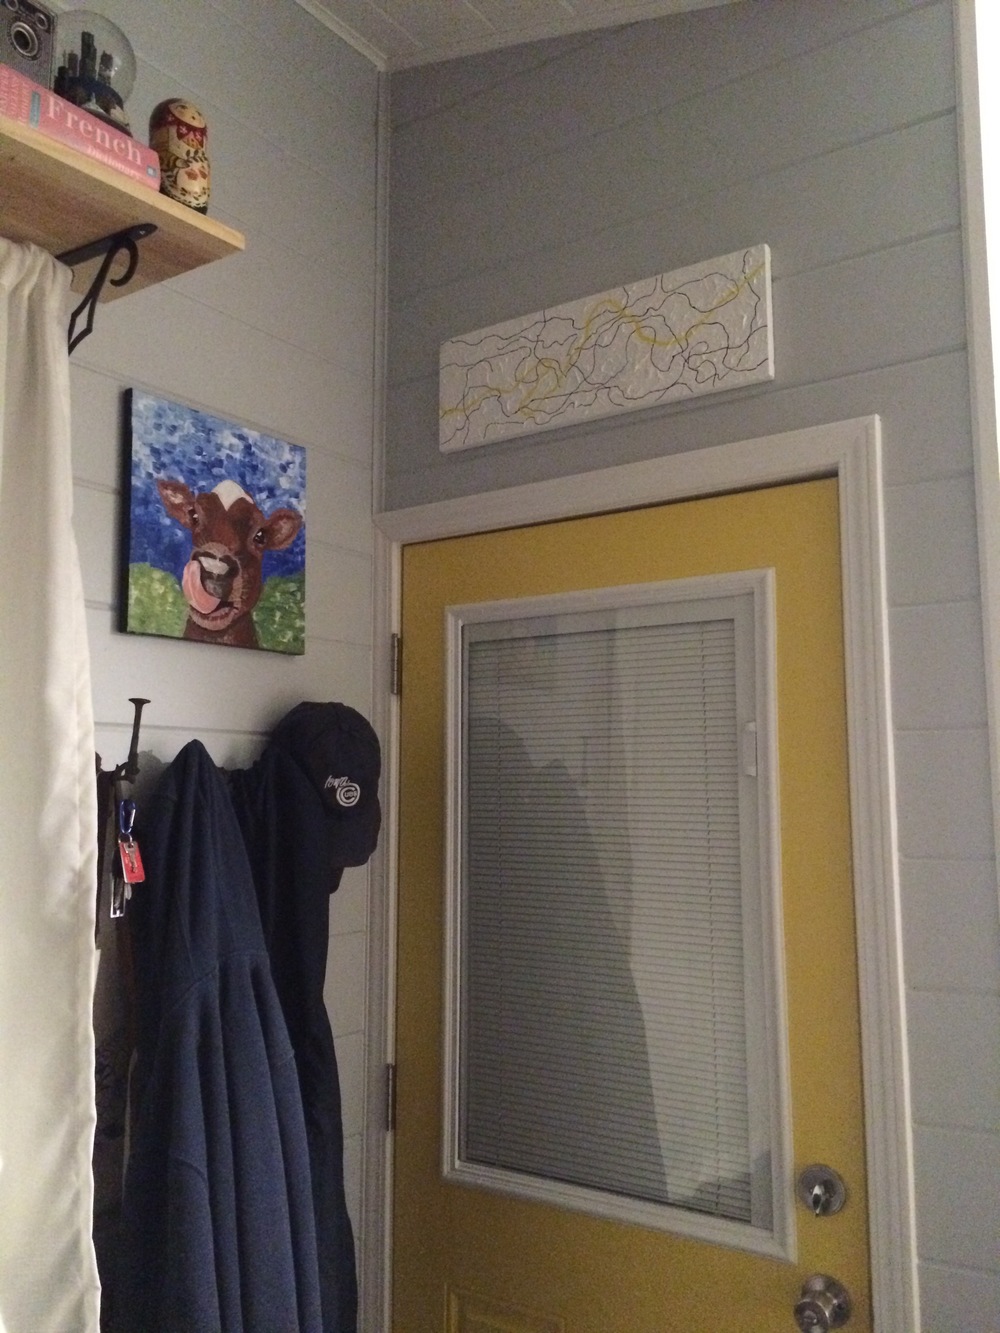  Our entryway. We have hooks for coats and hats and shoe storage that hangs on the wall beneath.&nbsp; 